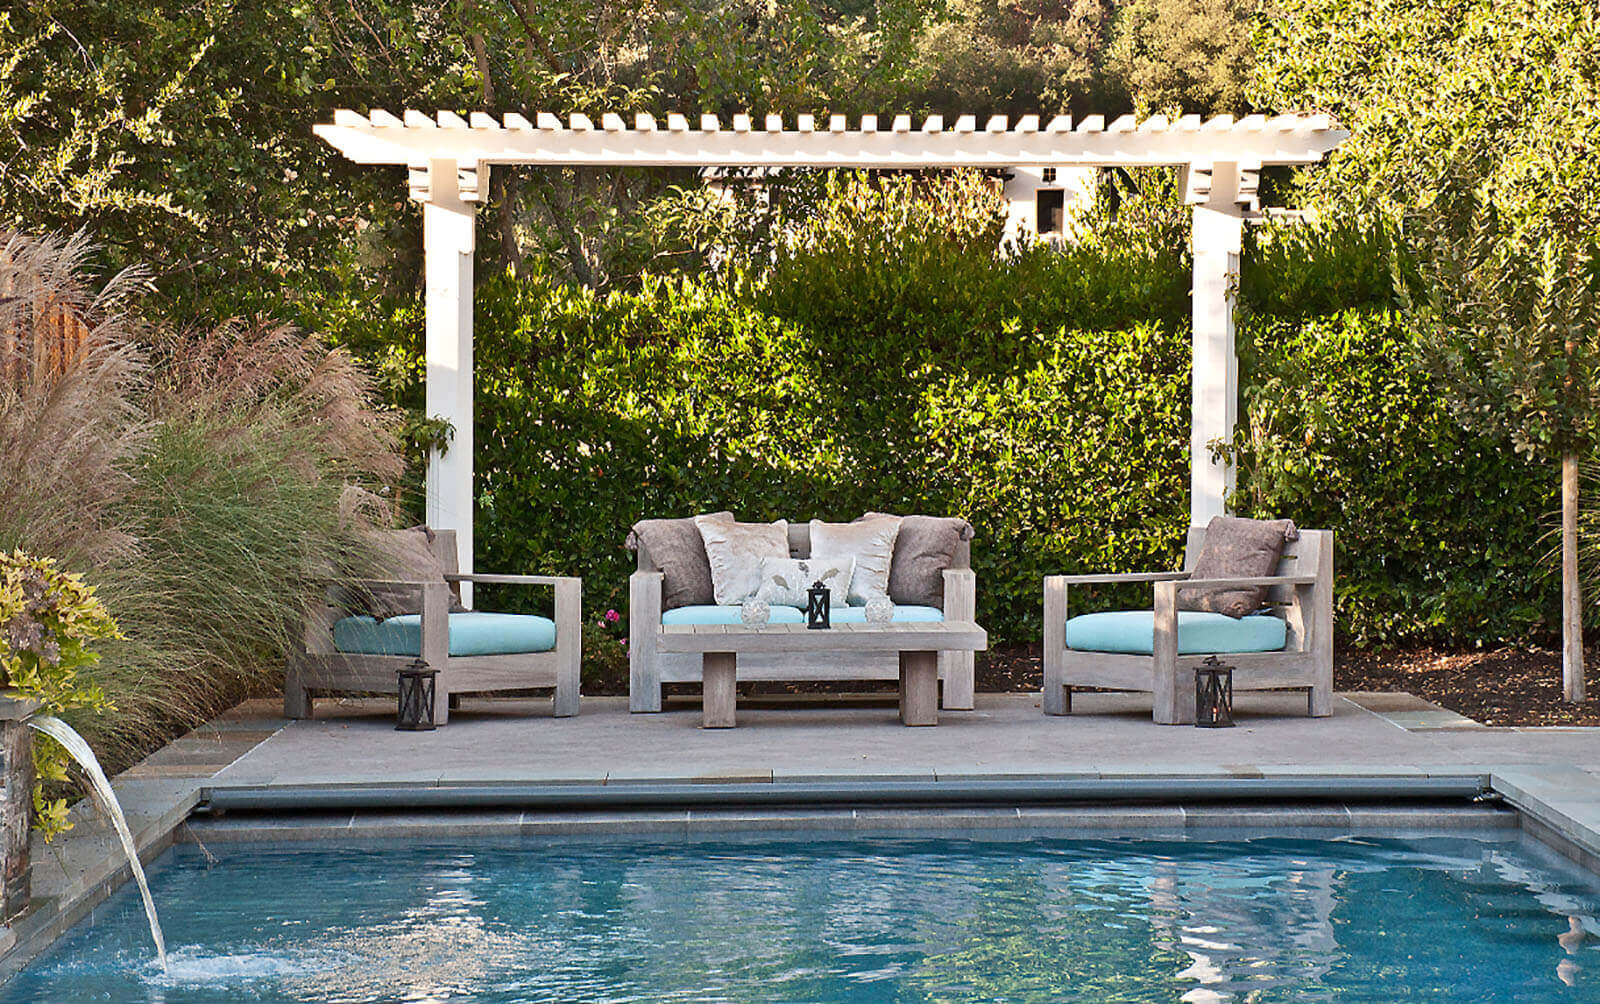 Classic white pergola shades a poolside seating area with backdrop of lush screening hedge